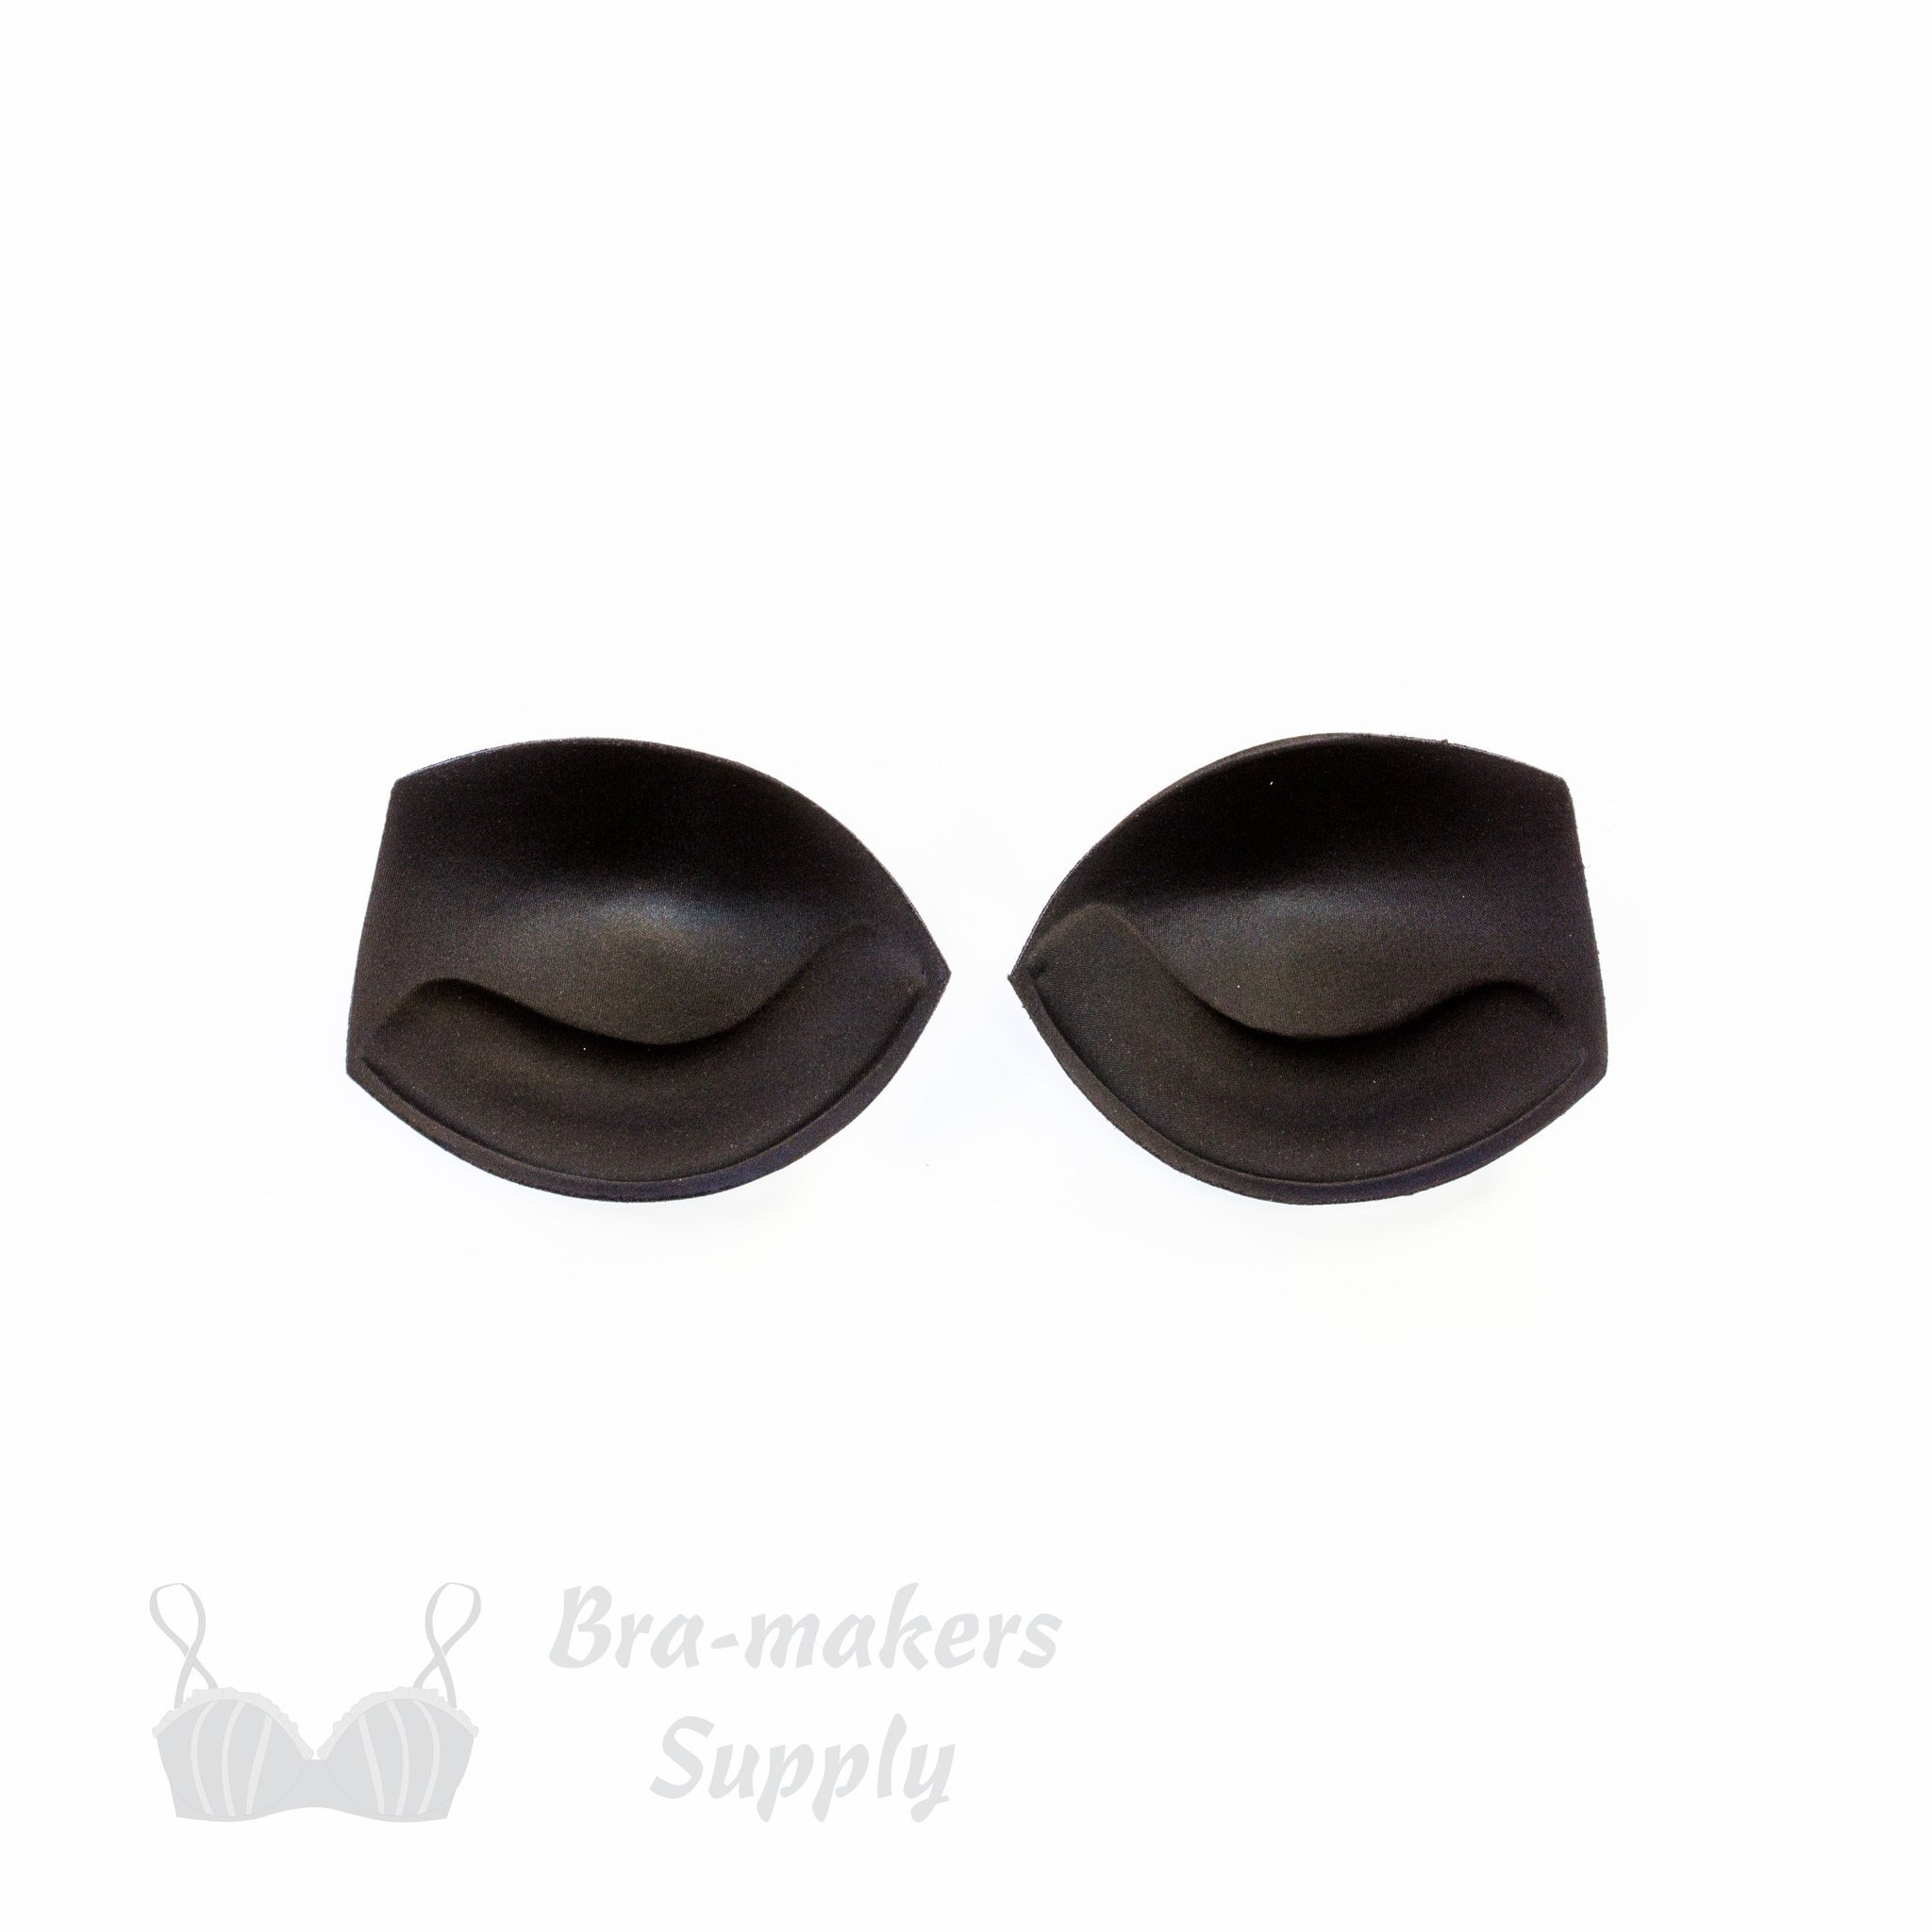 Sponge Big Foam Cup Quick Dry Nude Black Bra Cup Removable Bra Pad for  Underwear - China Bra Cup and Foam Bra Cup price